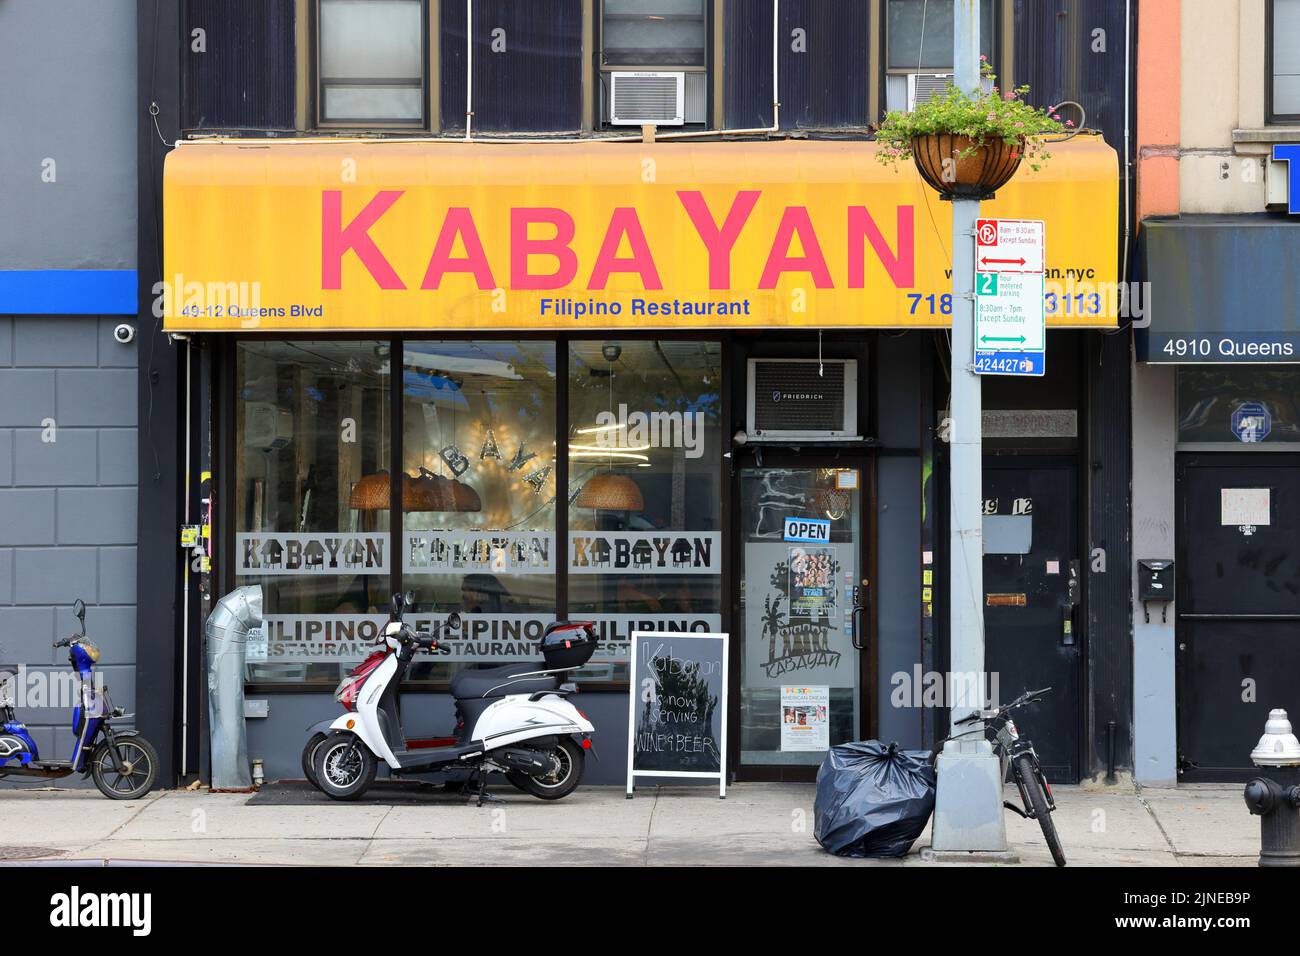 Kabayan, 49-12 Queens Blvd, Queens, New York. NYC storefront photo of a Filipino restaurant in the Sunnyside, woodside neighborhood. Stock Photo